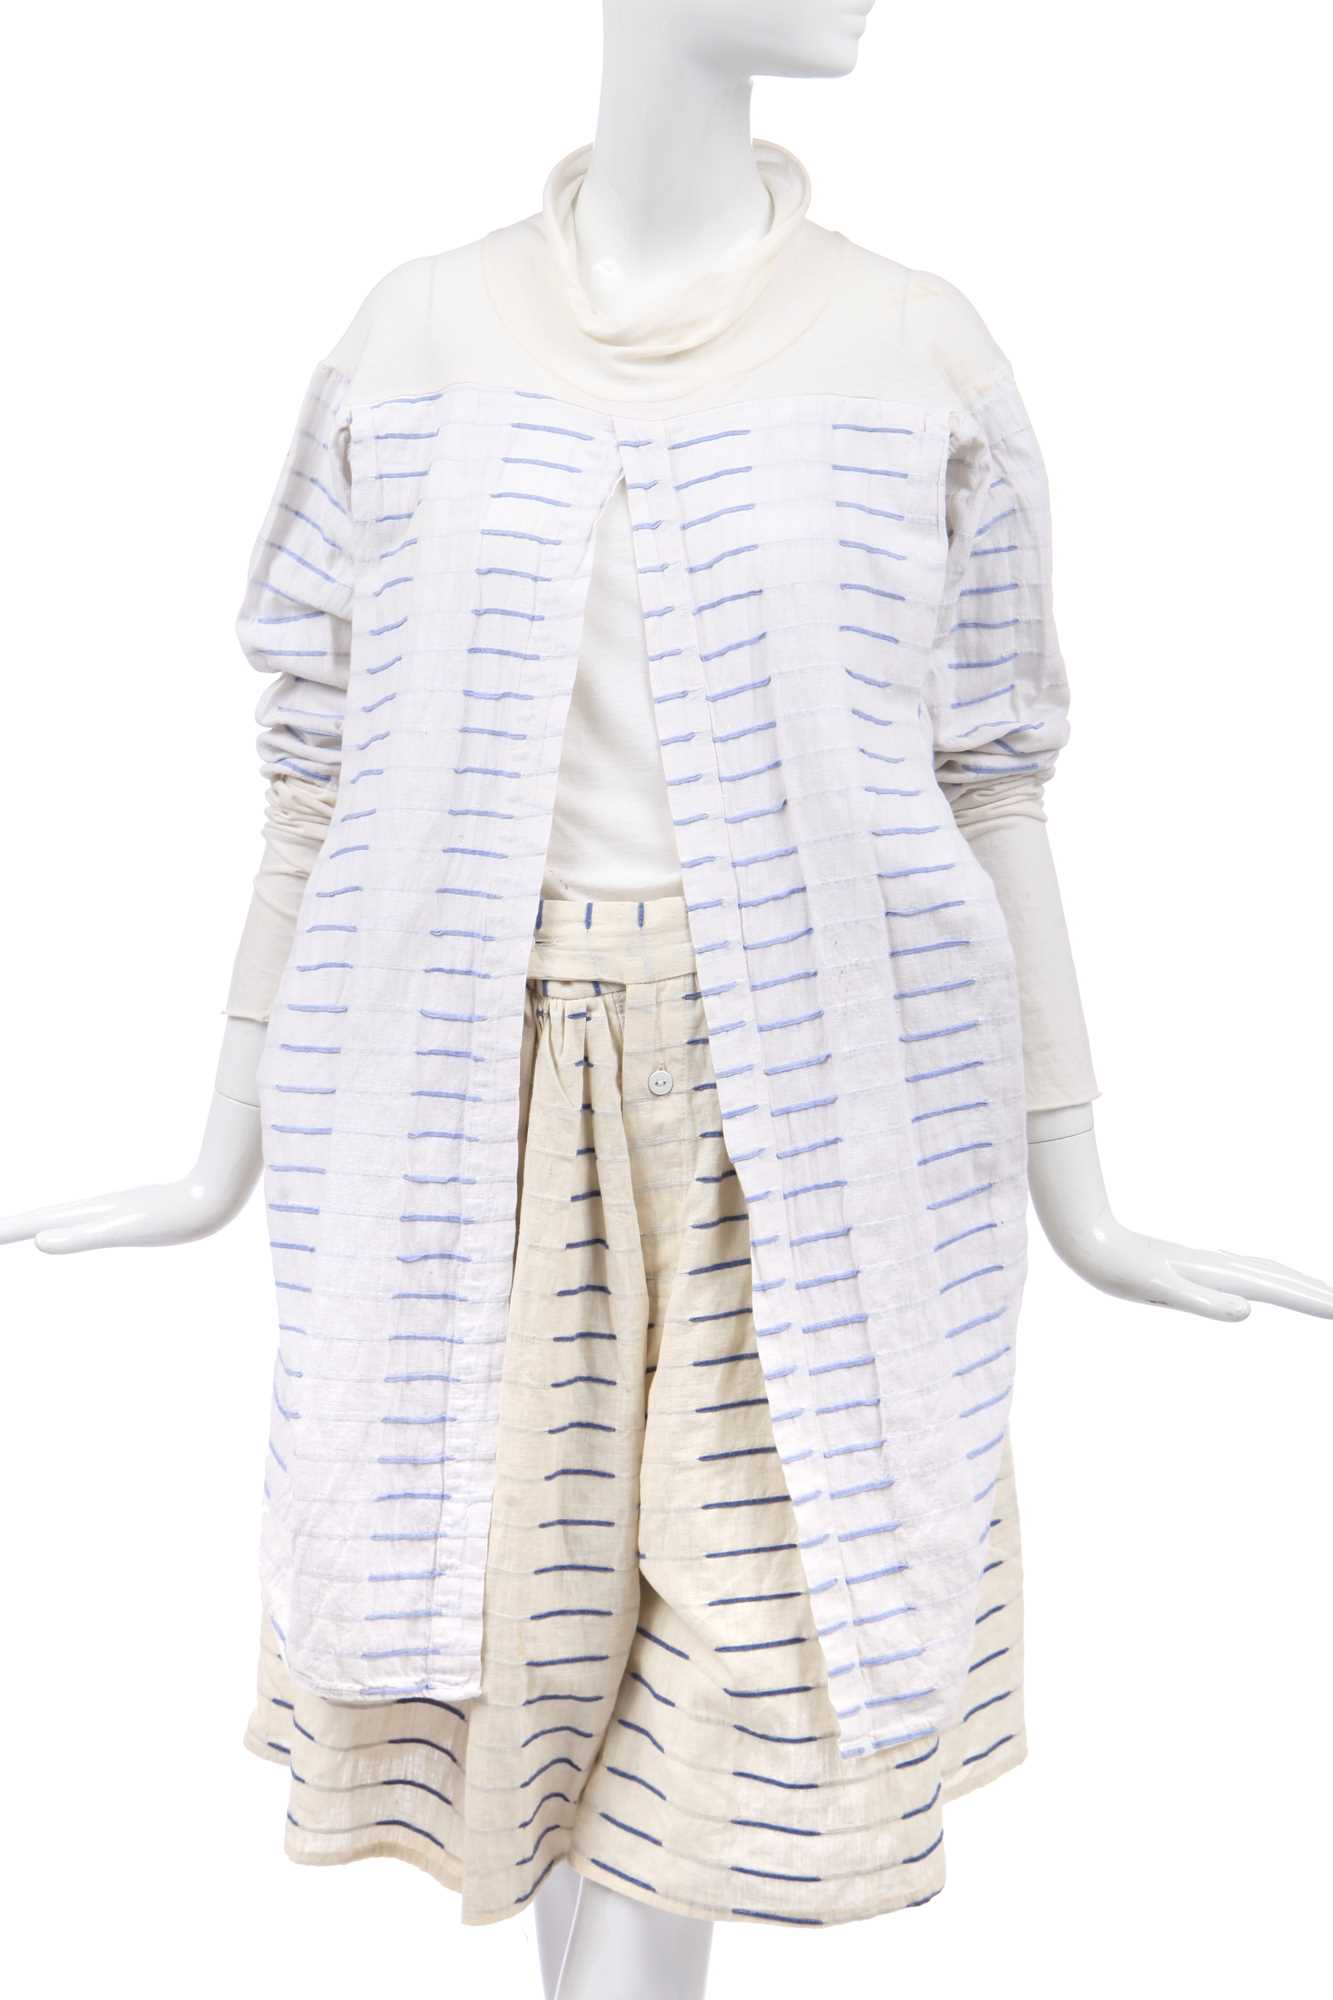 Lot 9 - A Westwood/McLaren striped cotton dress and culottes, 'Savage' collection, Spring-Summer 1982